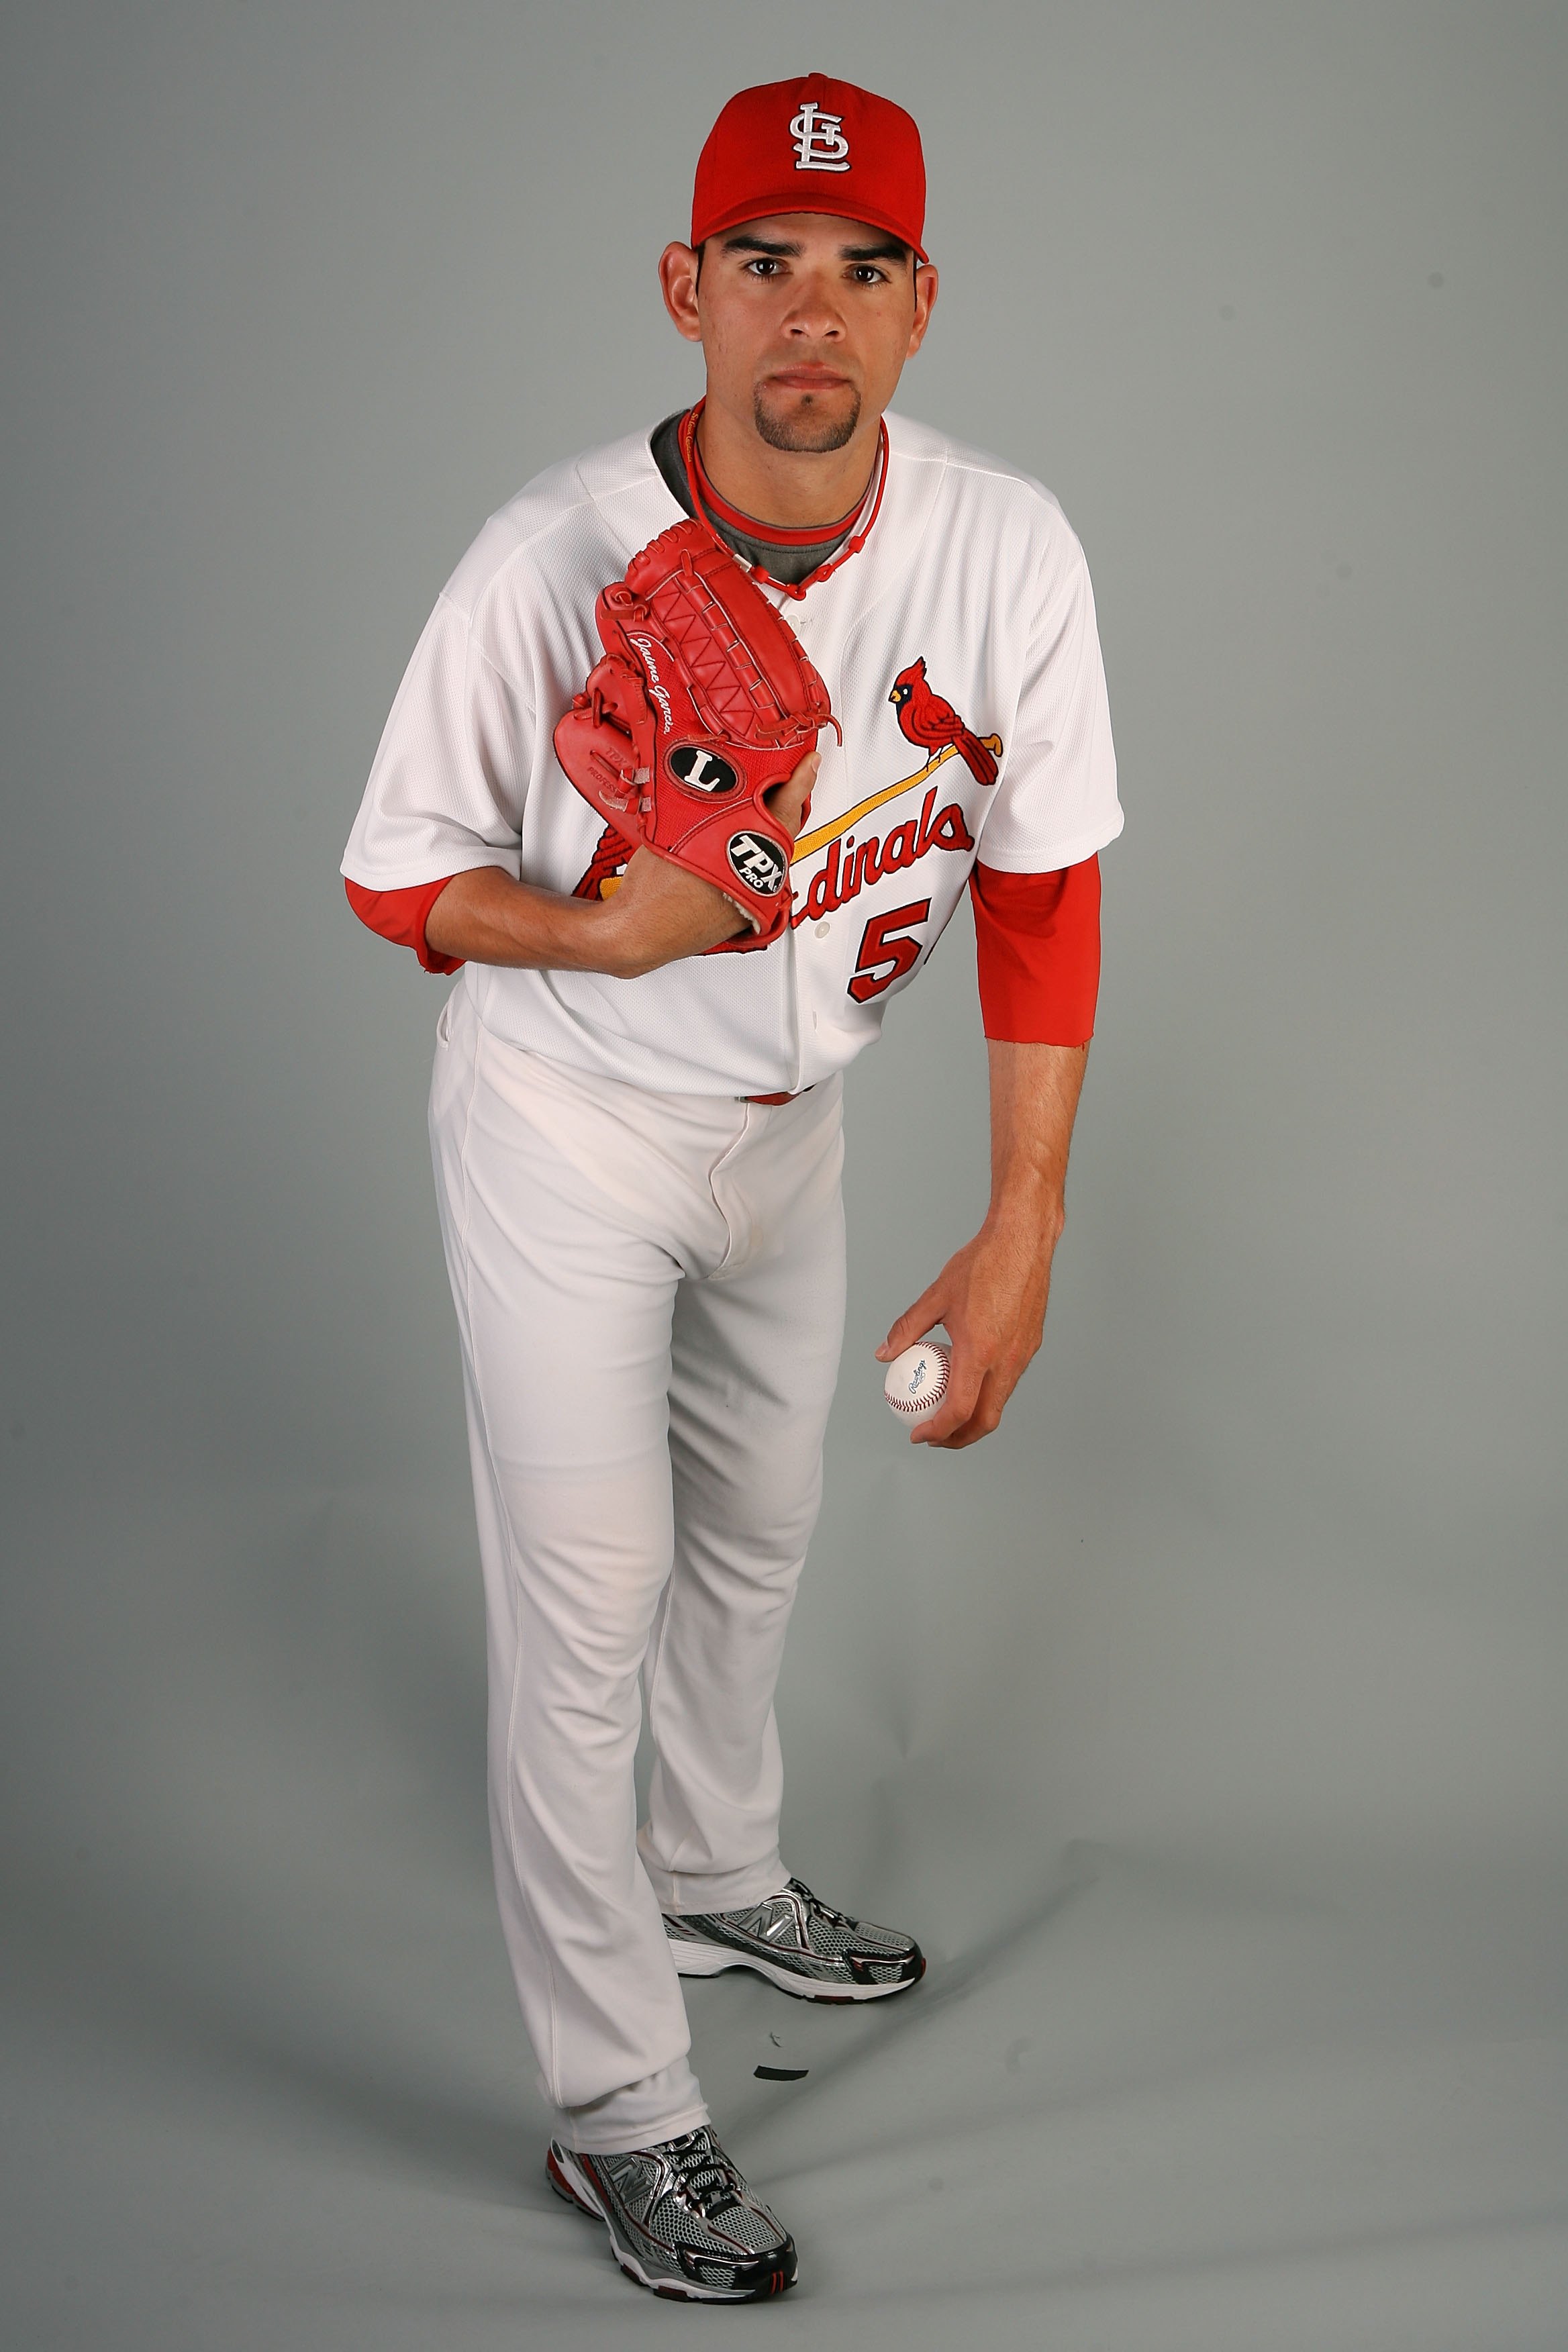 JUPITER, FL - MARCH 01:  Pitcher Jaime Garcia #54 of the St. Louis Cardinals during photo day at Roger Dean Stadium on March 1, 2010 in Jupiter, Florida.  (Photo by Doug Benc/Getty Images)